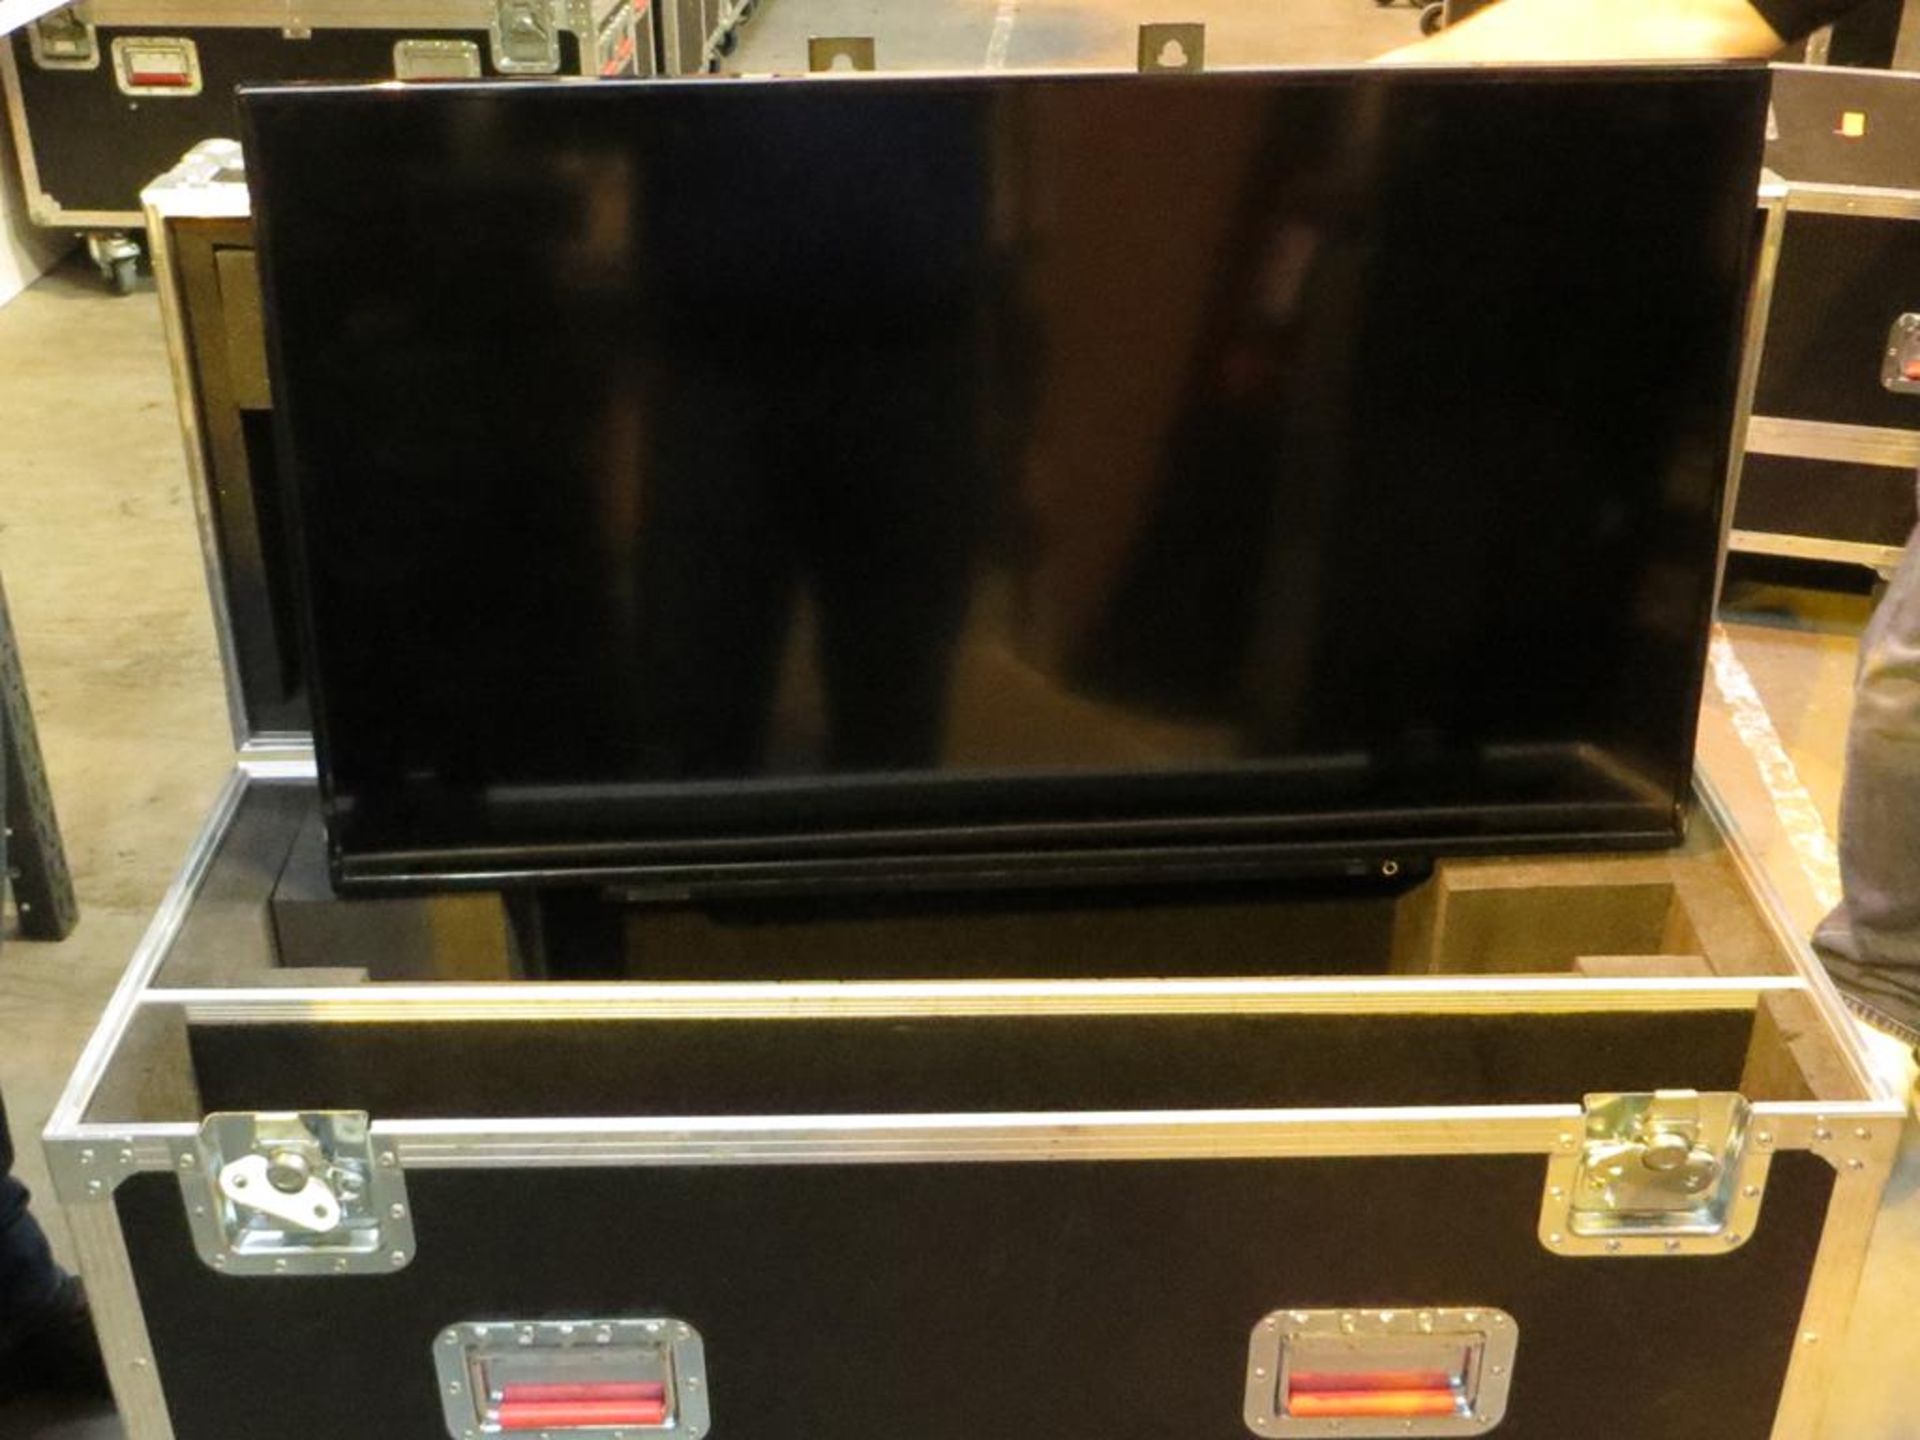 Toshiba, 40" Smart TV, Model 40L2056D with wall bracket and Unicol, mount in transit case: Unit C - Image 2 of 2